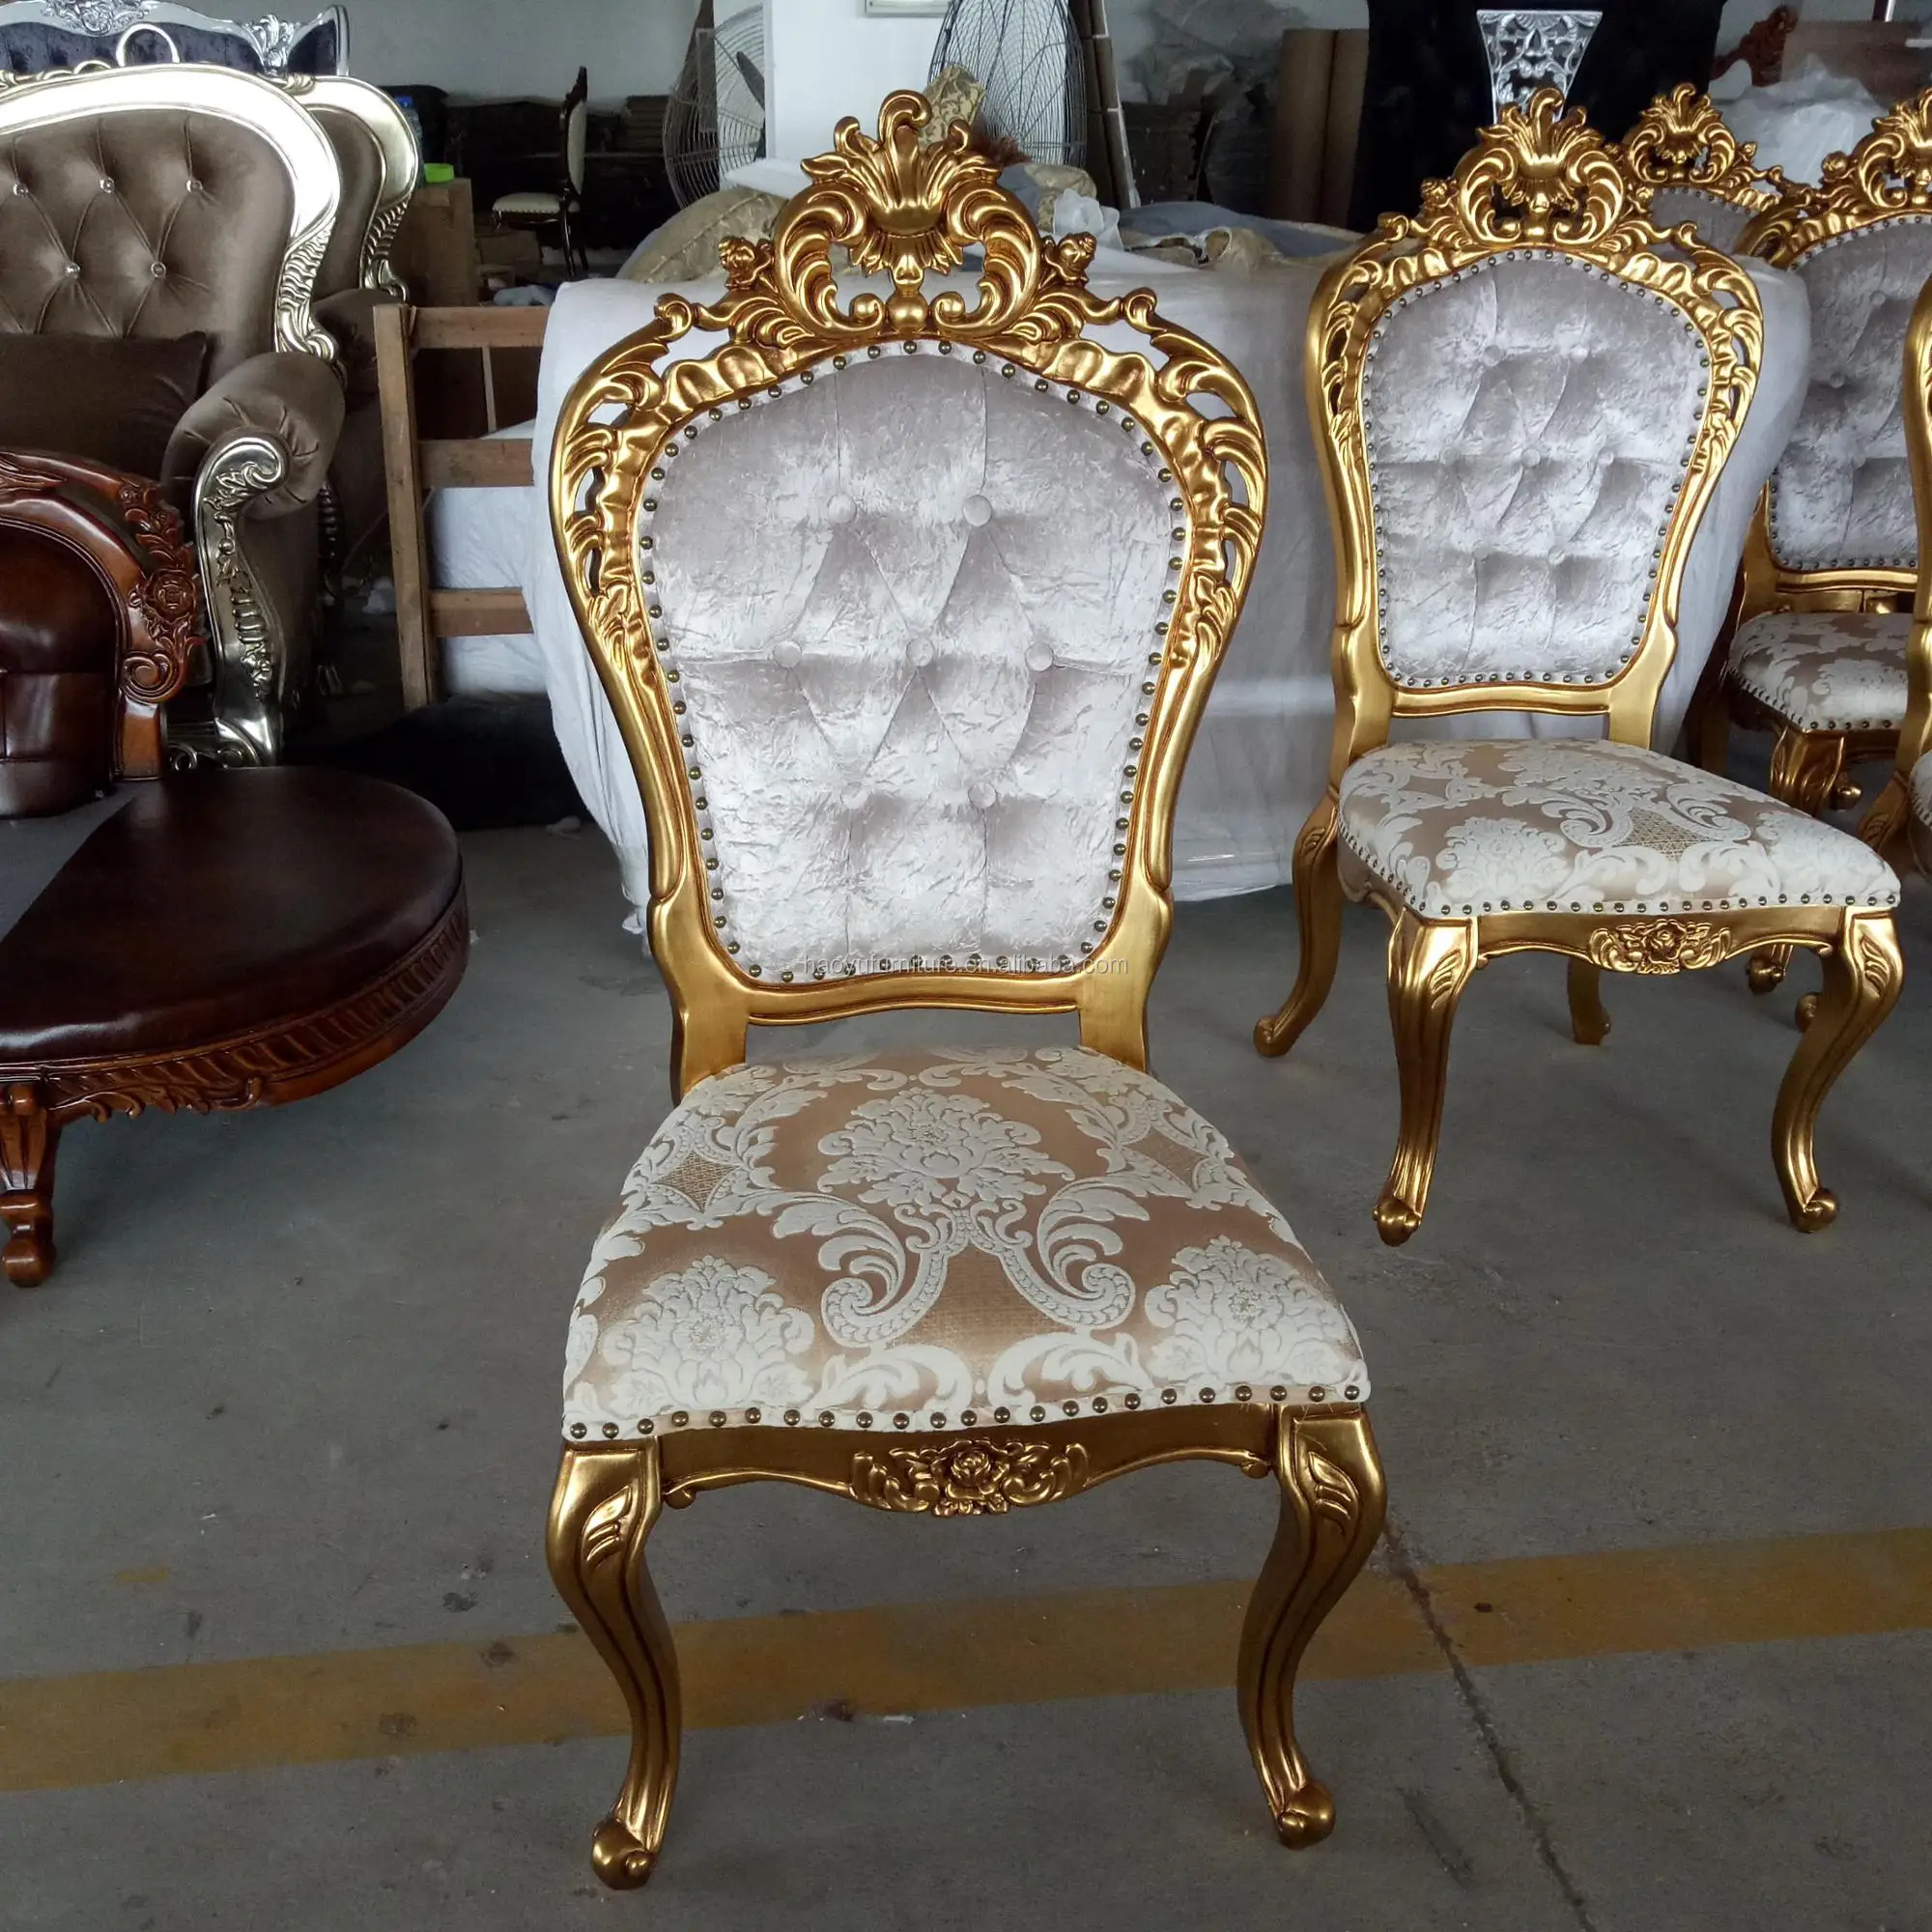 Hot Sale Antique Royal Chairs Buy Antique Royal Chairs